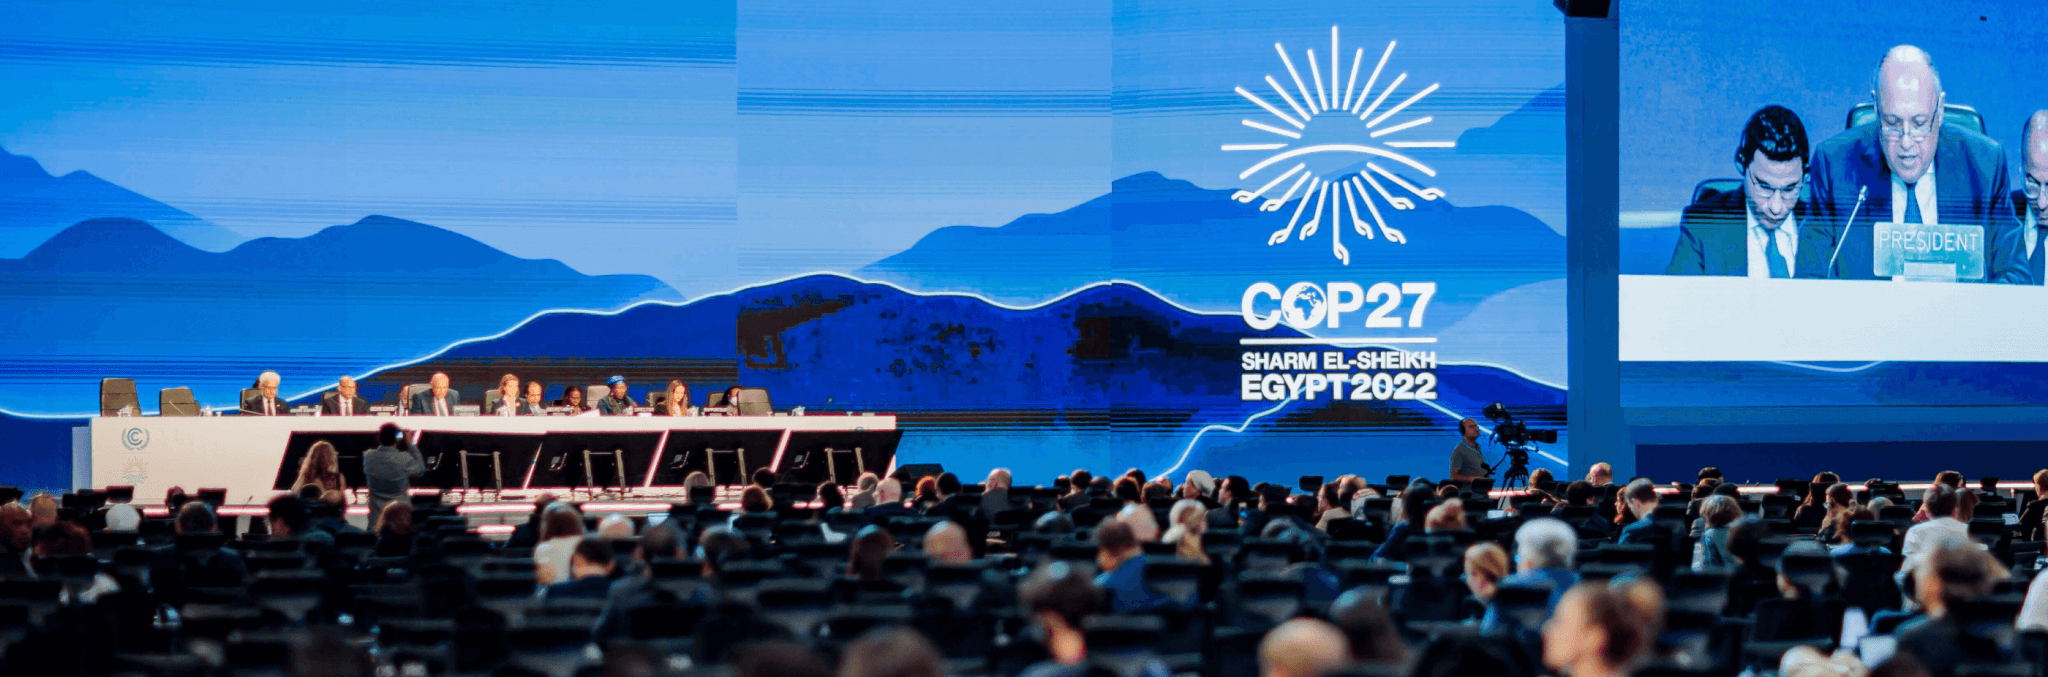 COP27: Four key storylines that will shape the climate agenda in 2023